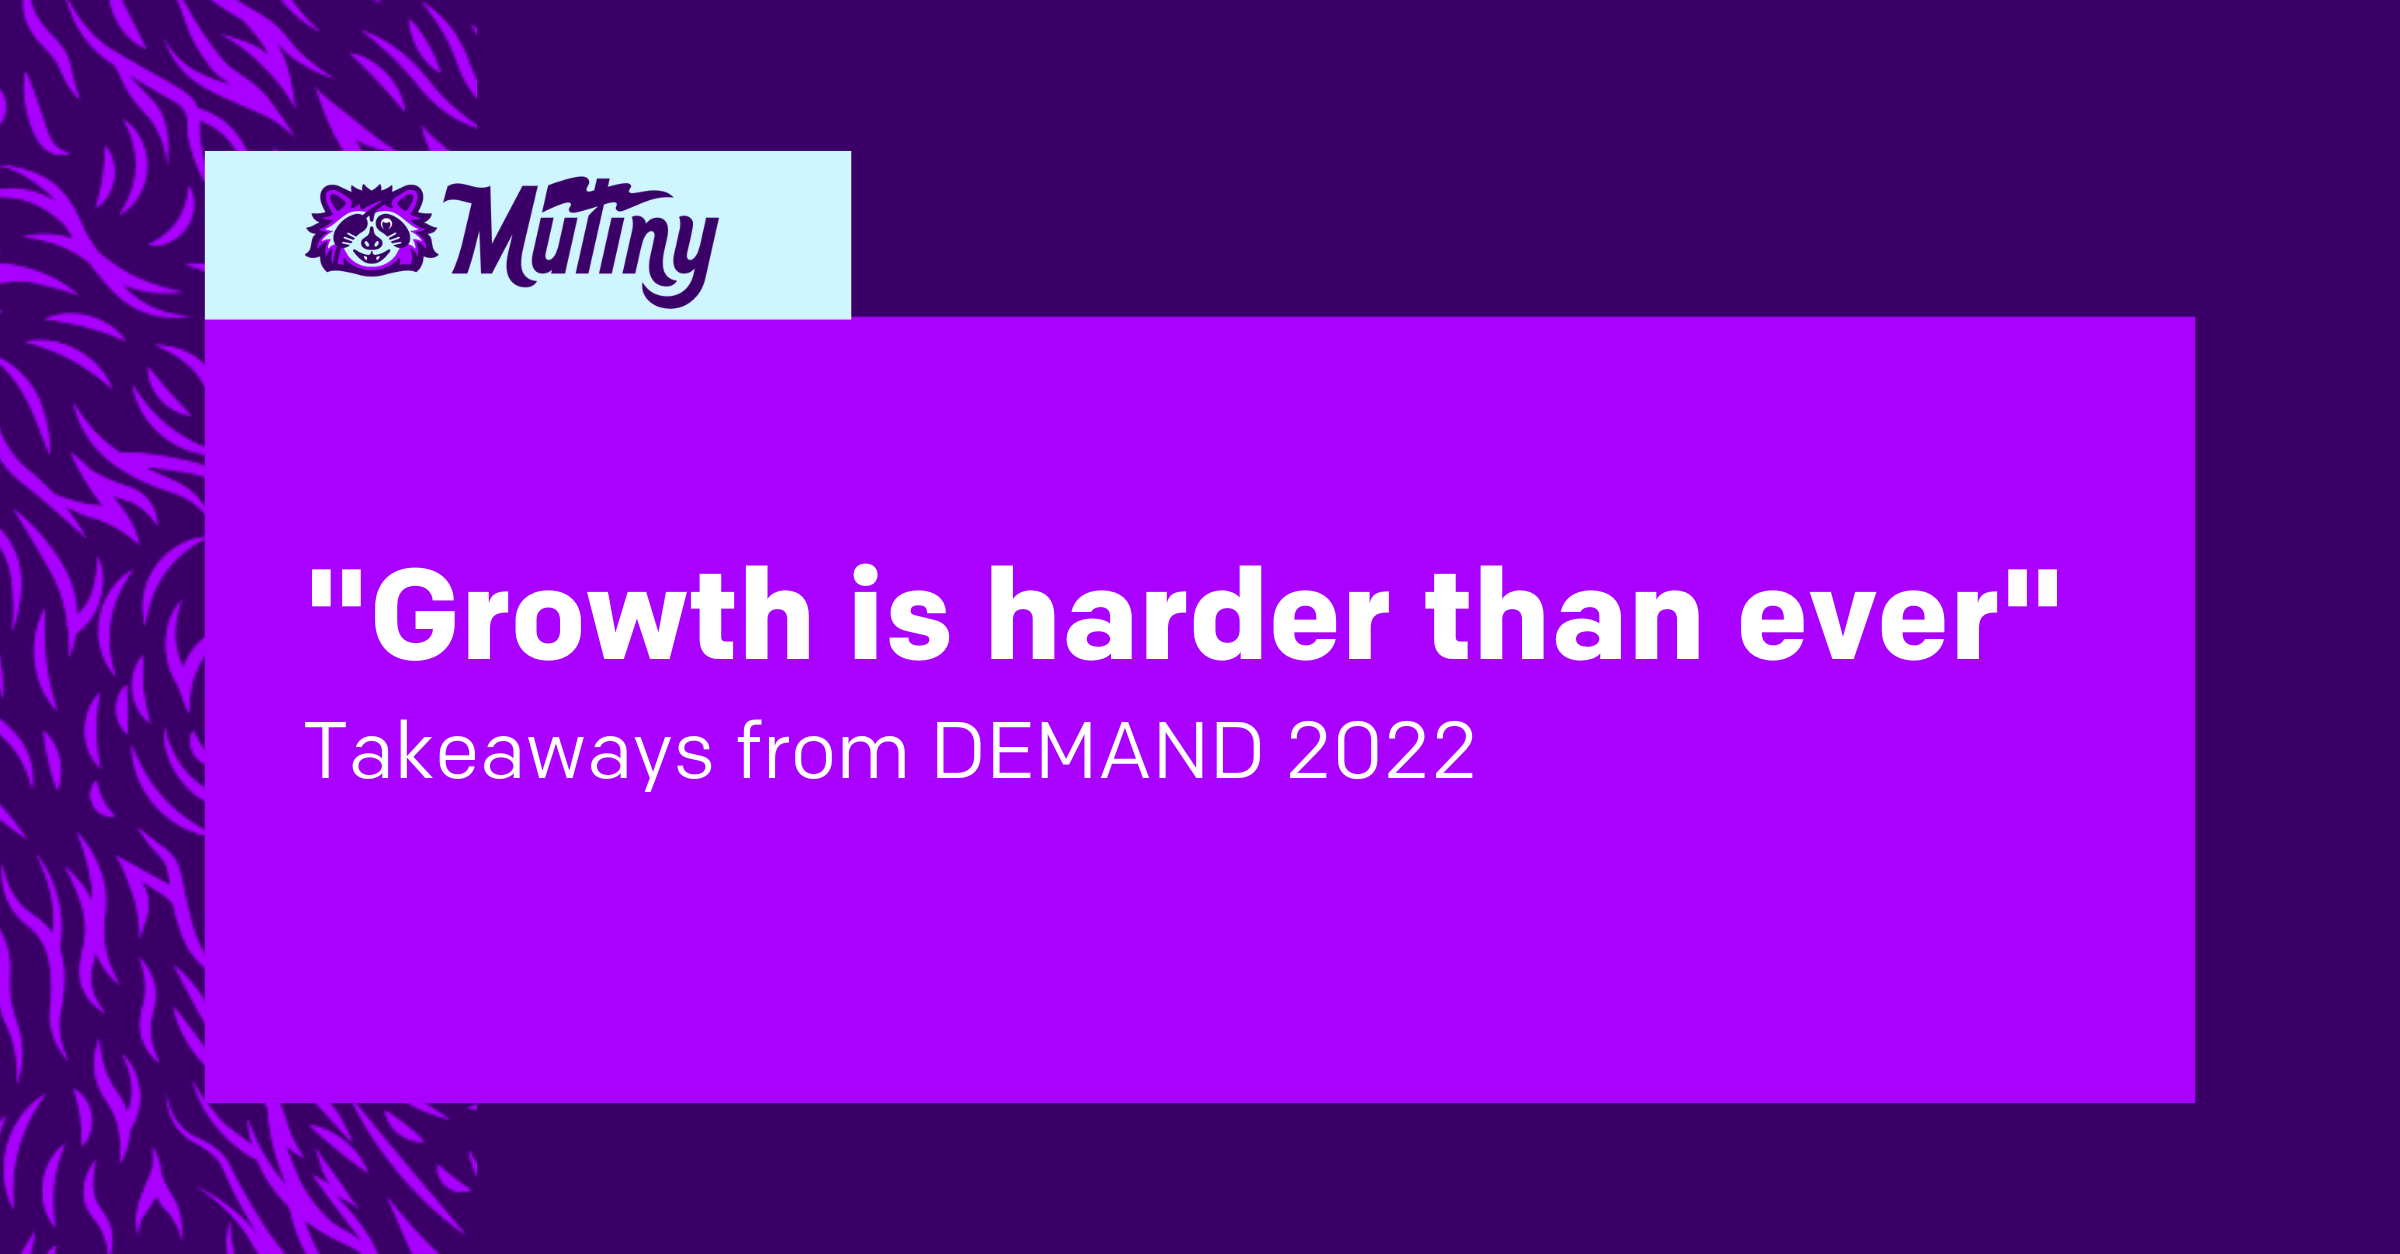 Growth is harder than ever: What I learned attending Metadata’s DEMAND event